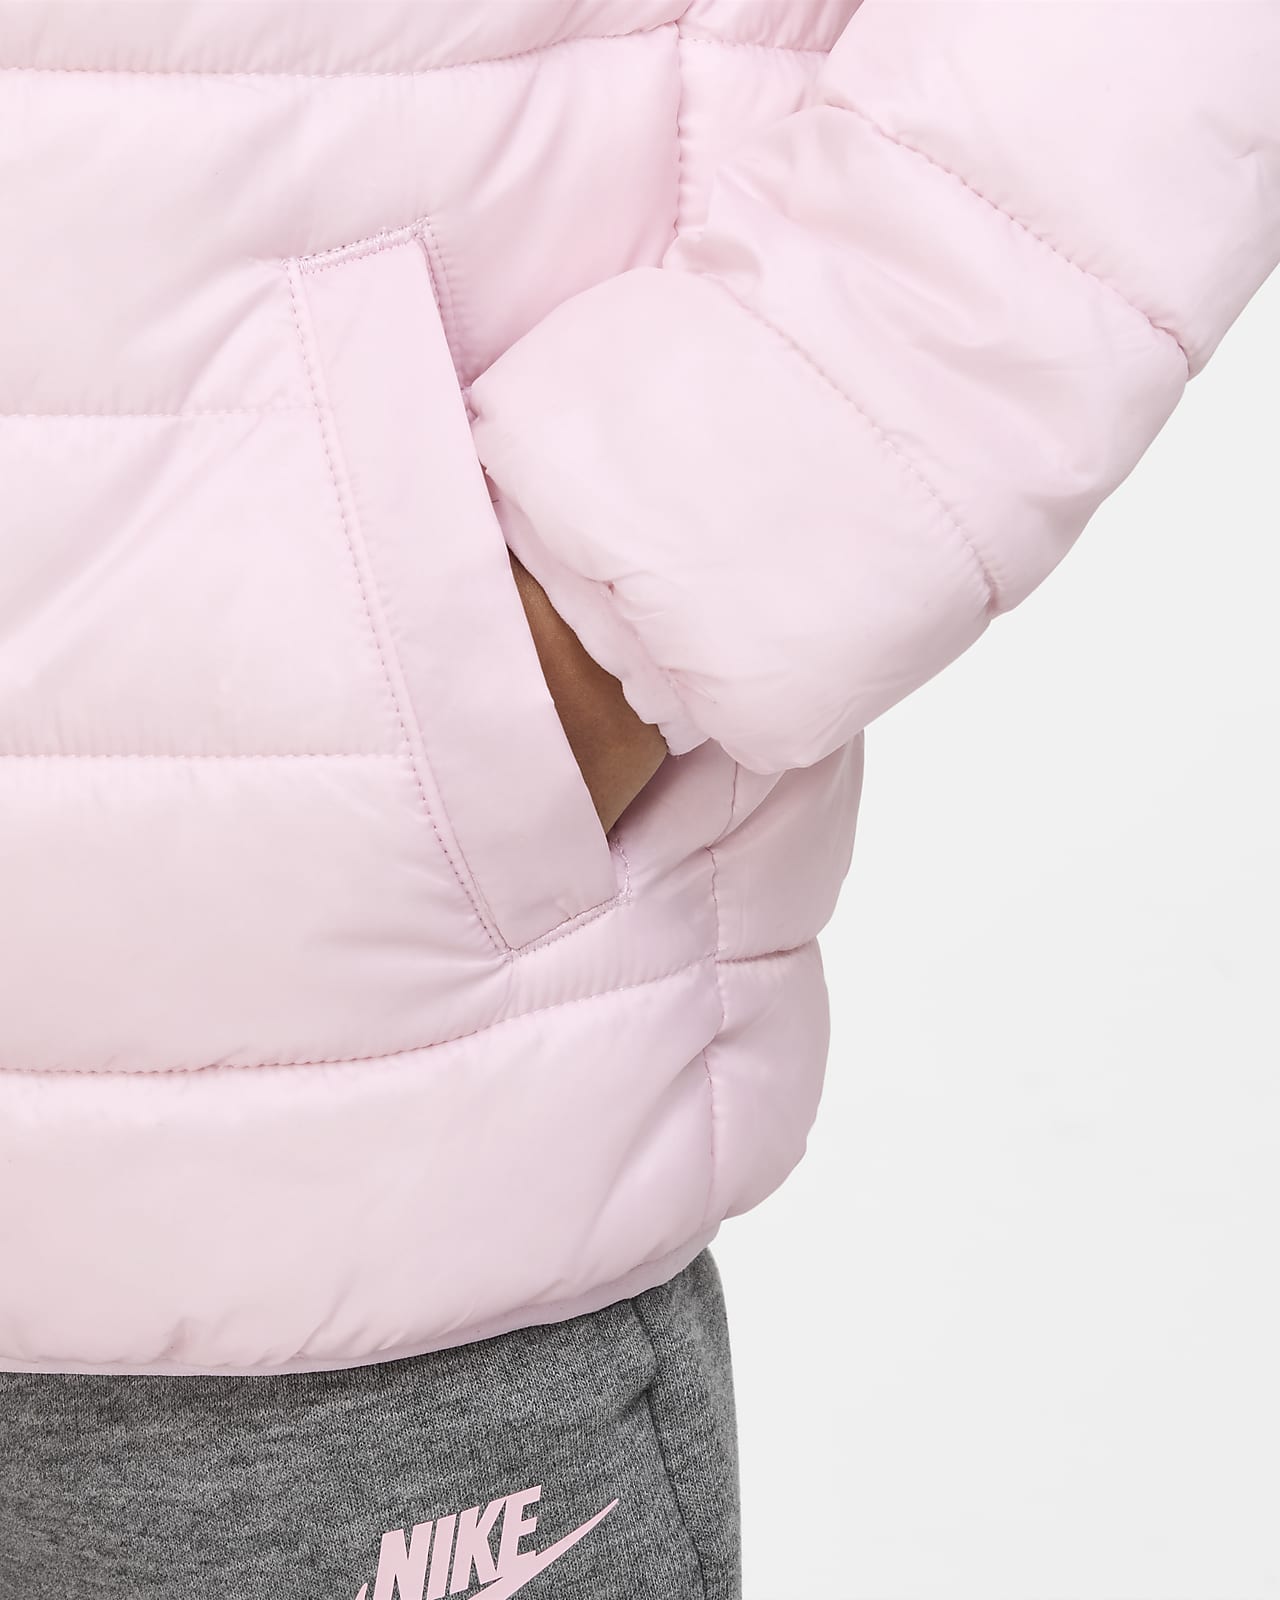 Persona especial Indiferencia loto Nike Solid Puffer Jacket Little Kids' Jacket. Nike.com